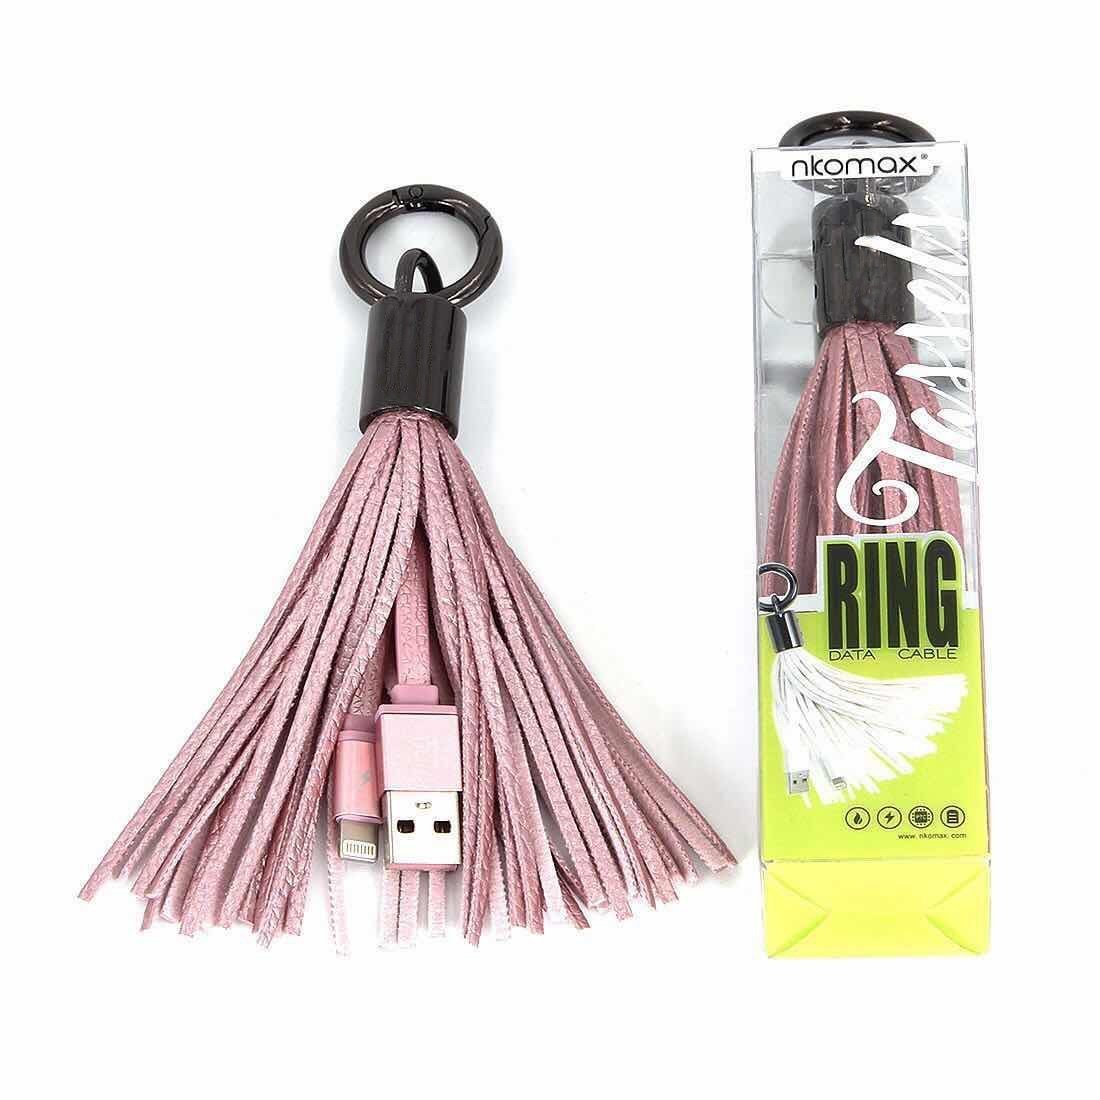 Nkomax Charging Cable USB Cable Keychain Charger,USB Portable Tassel Leather Fast Short USB Cable